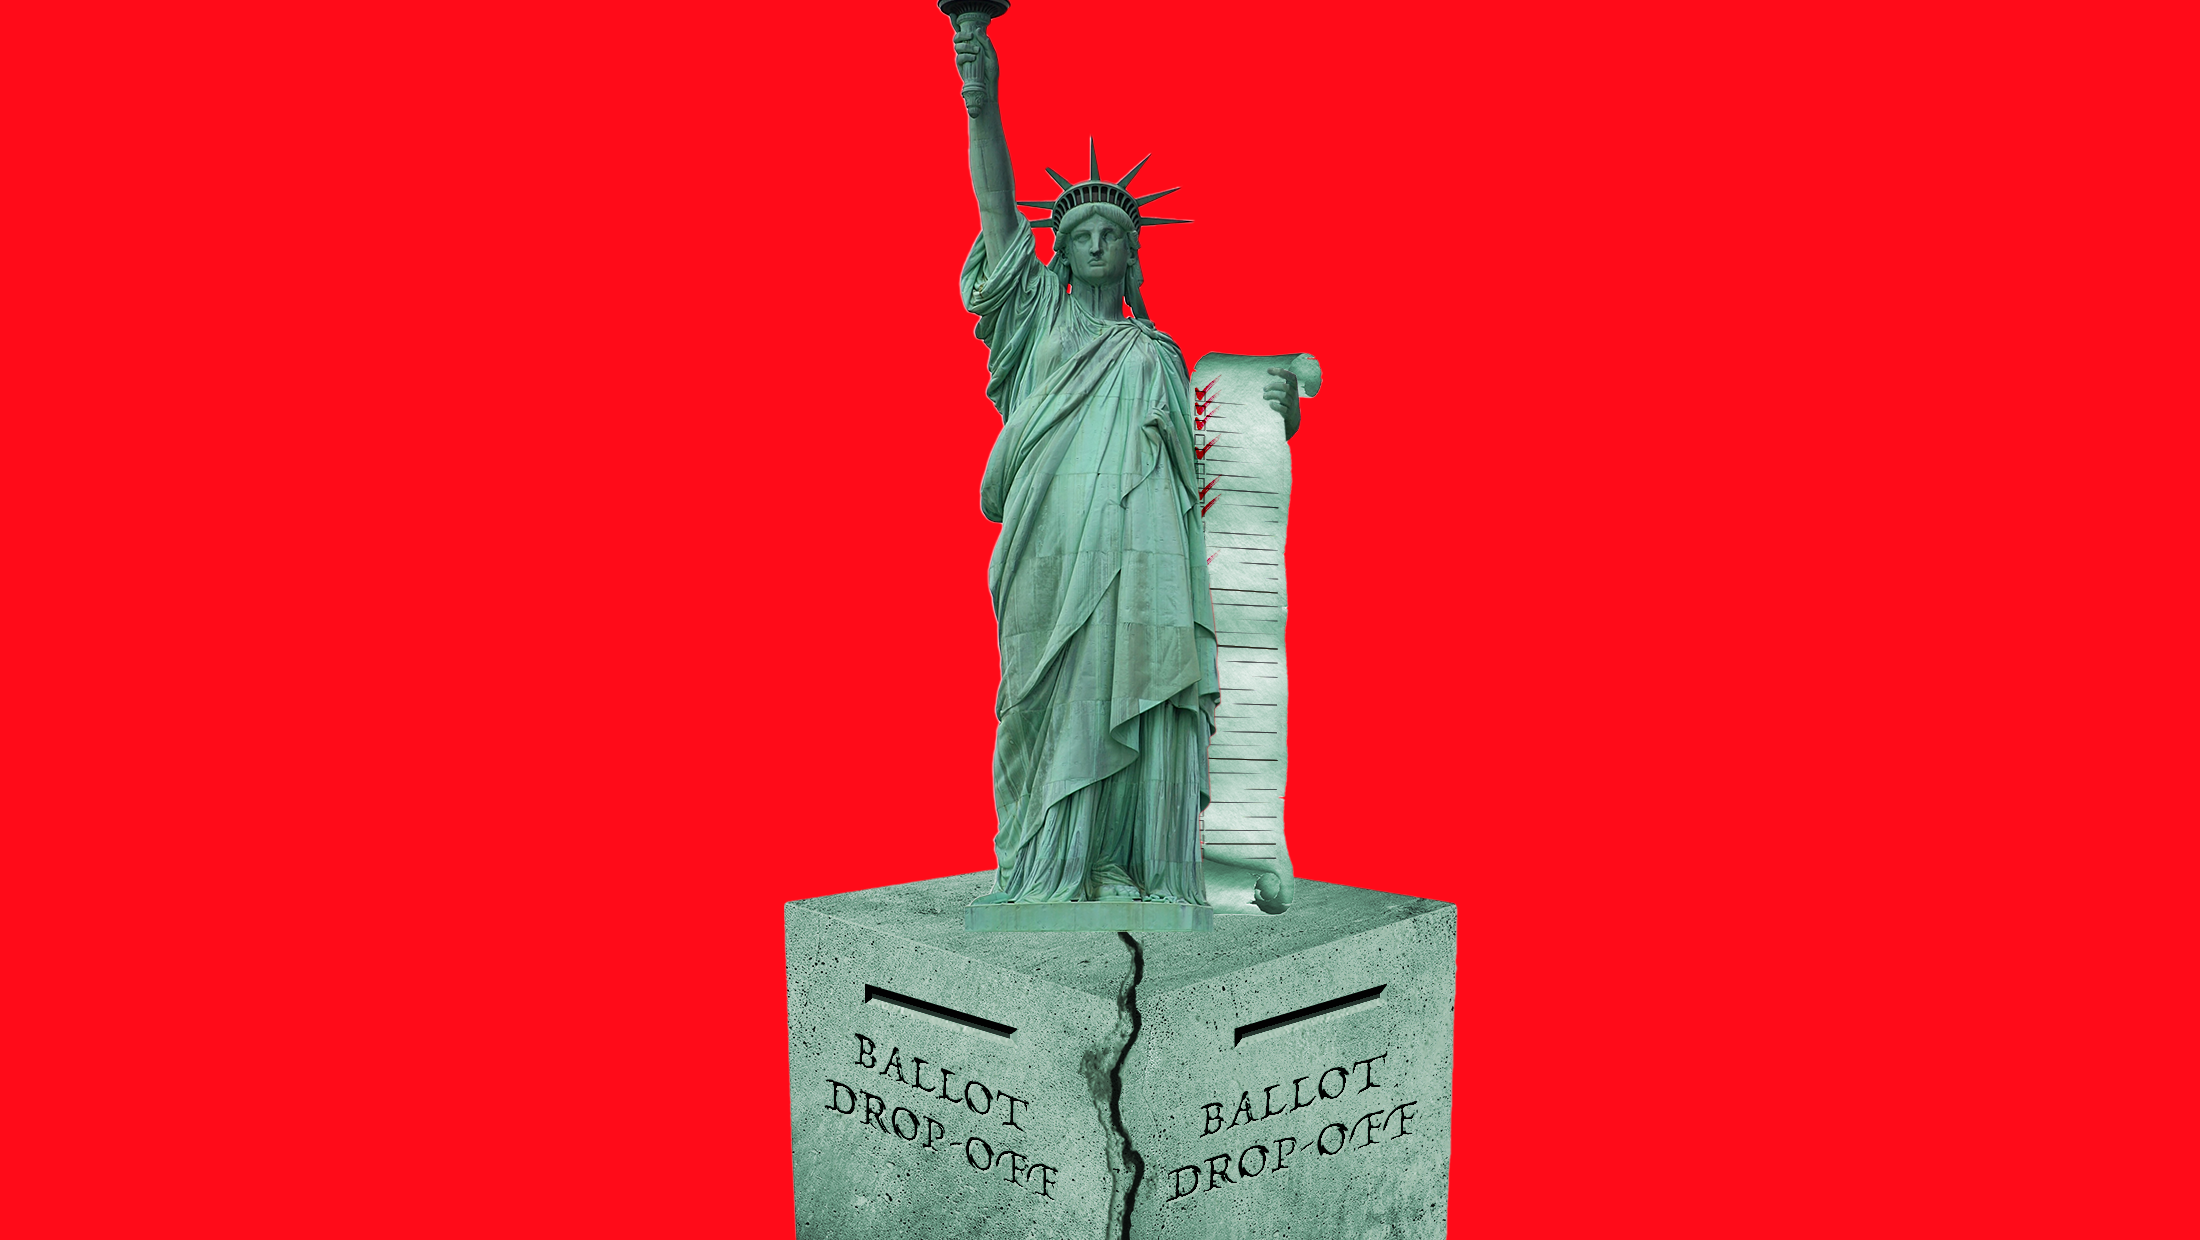 The Statue of Liberty holding a scroll in her right hand on top of a cracked ballot box